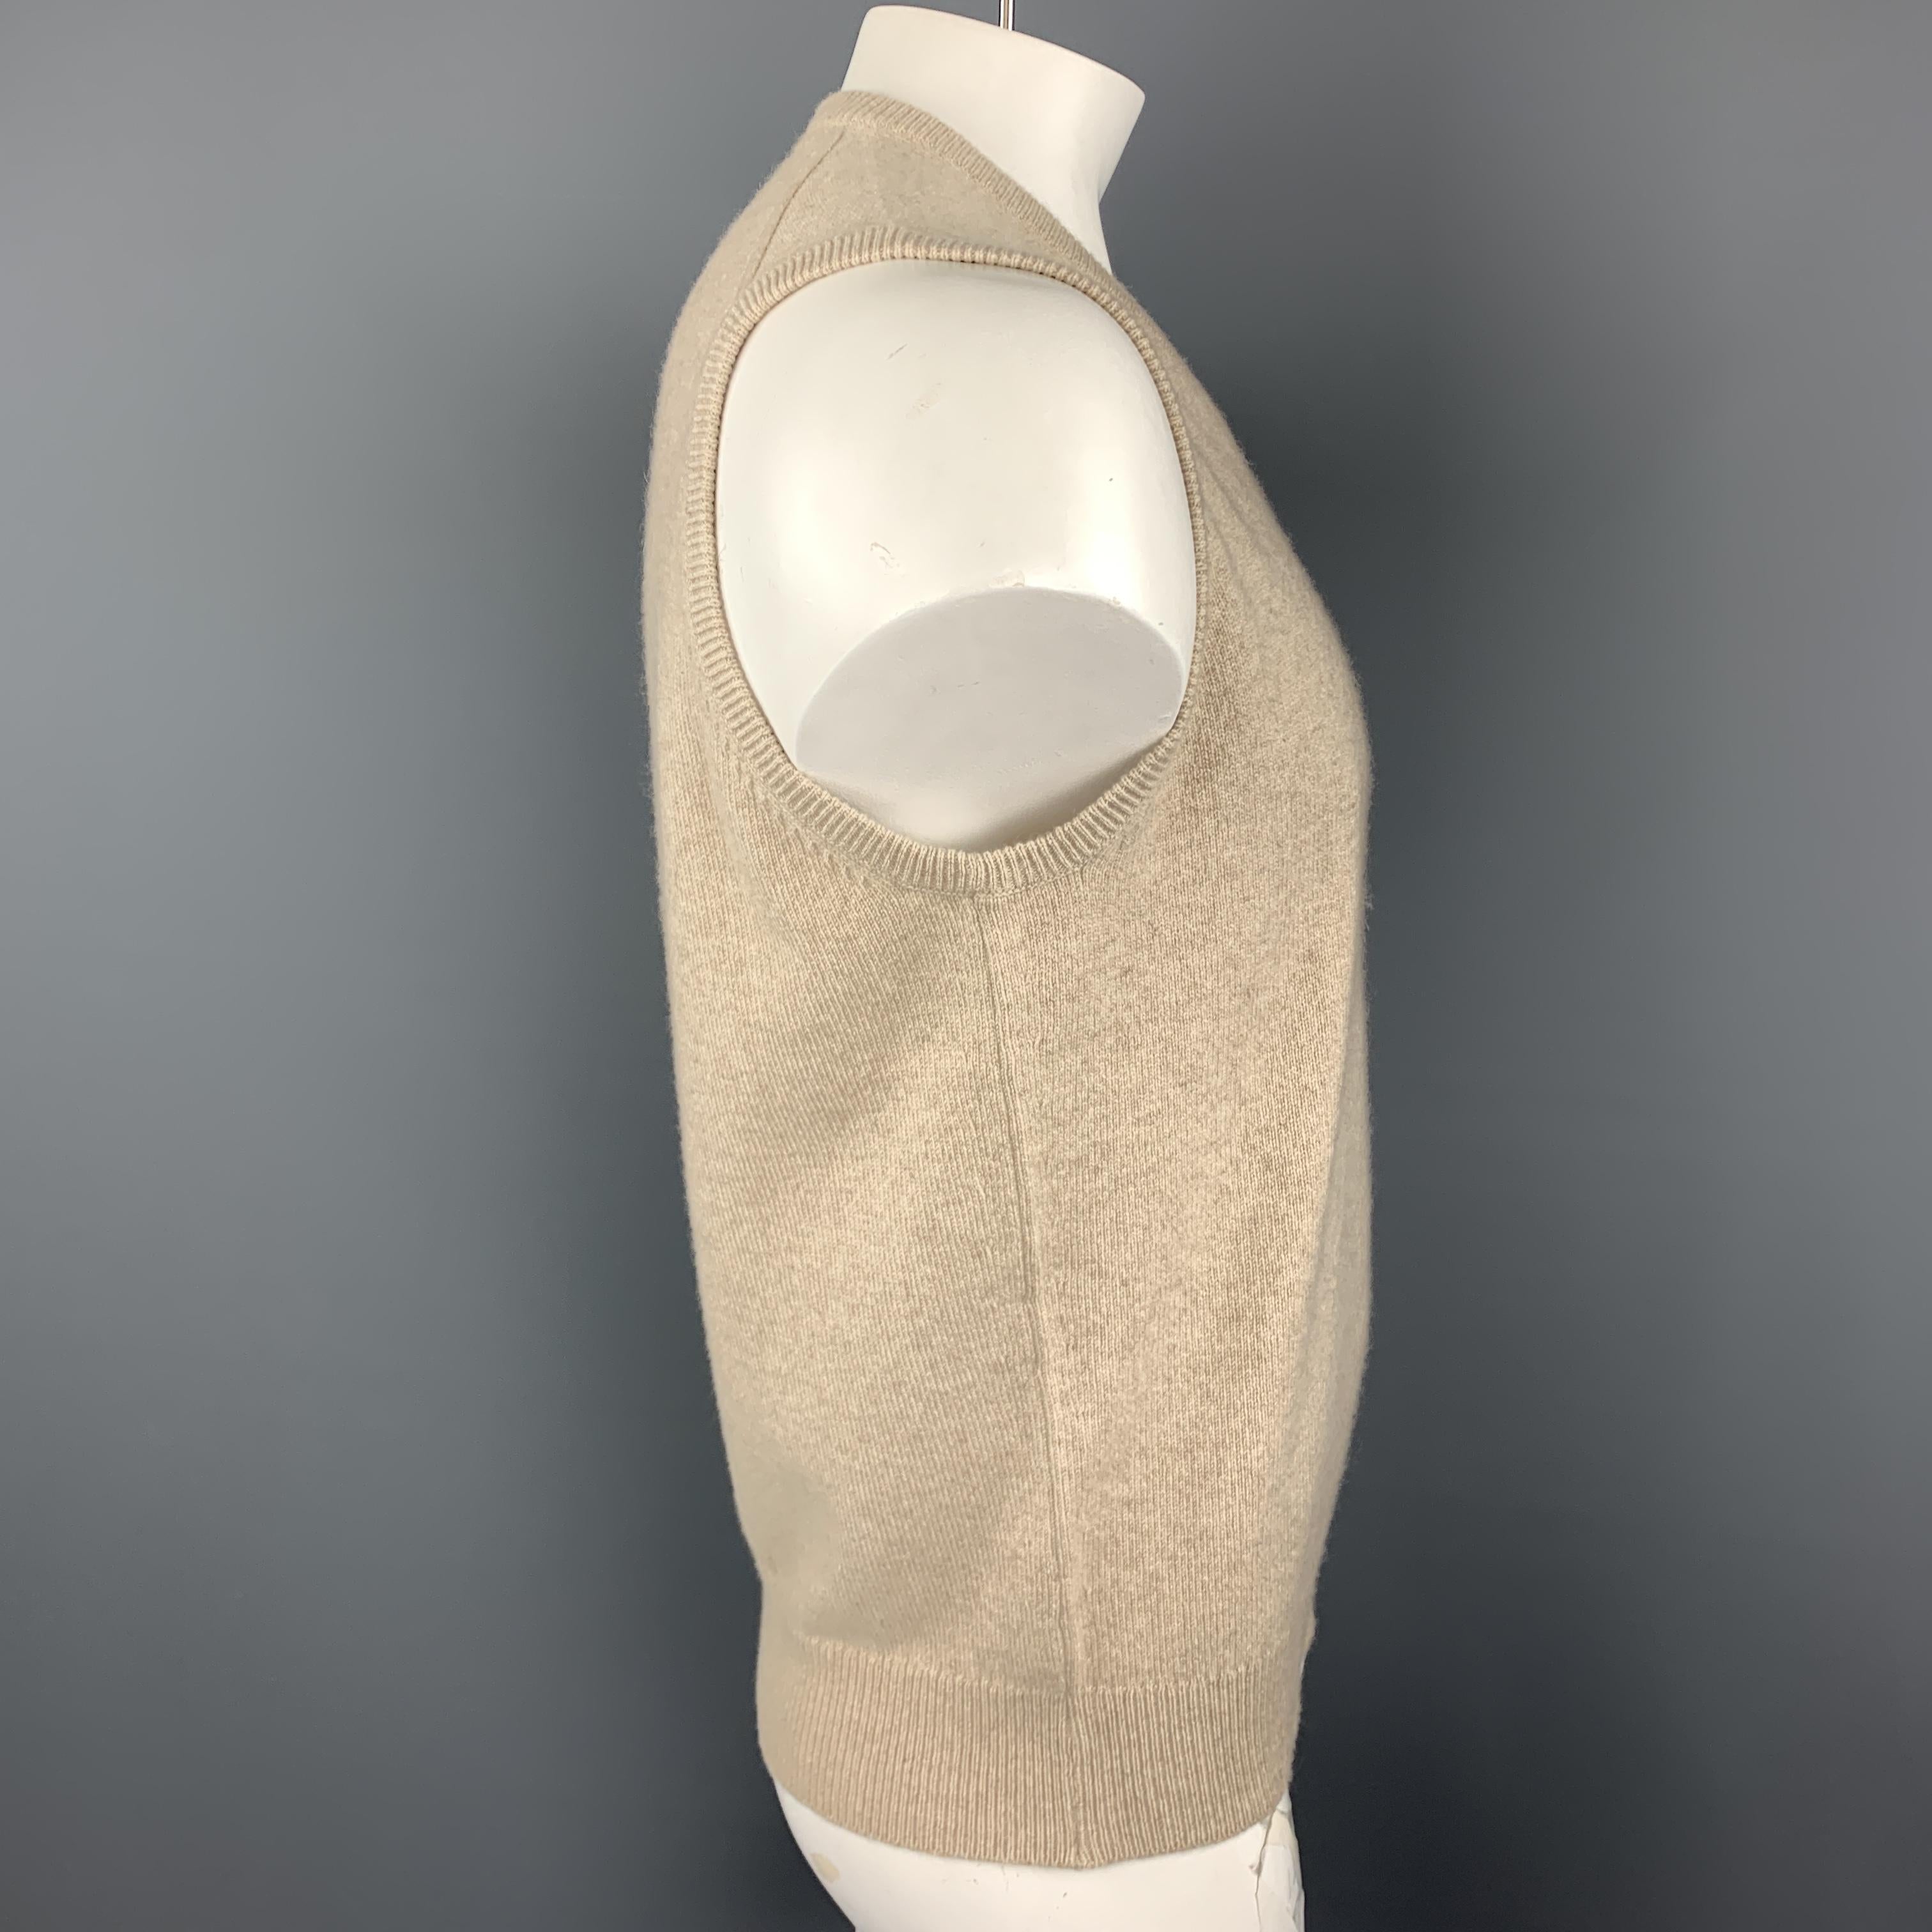 BALLANTYNE sweater vest comes in cashmere knit with a v neck. Made in Scotland.

Excellent Pre-Owned Condition.
Marked: 44

Measurements:

Shoulder: 17 in.
Chest: 44 in.
Length: 28 in.  